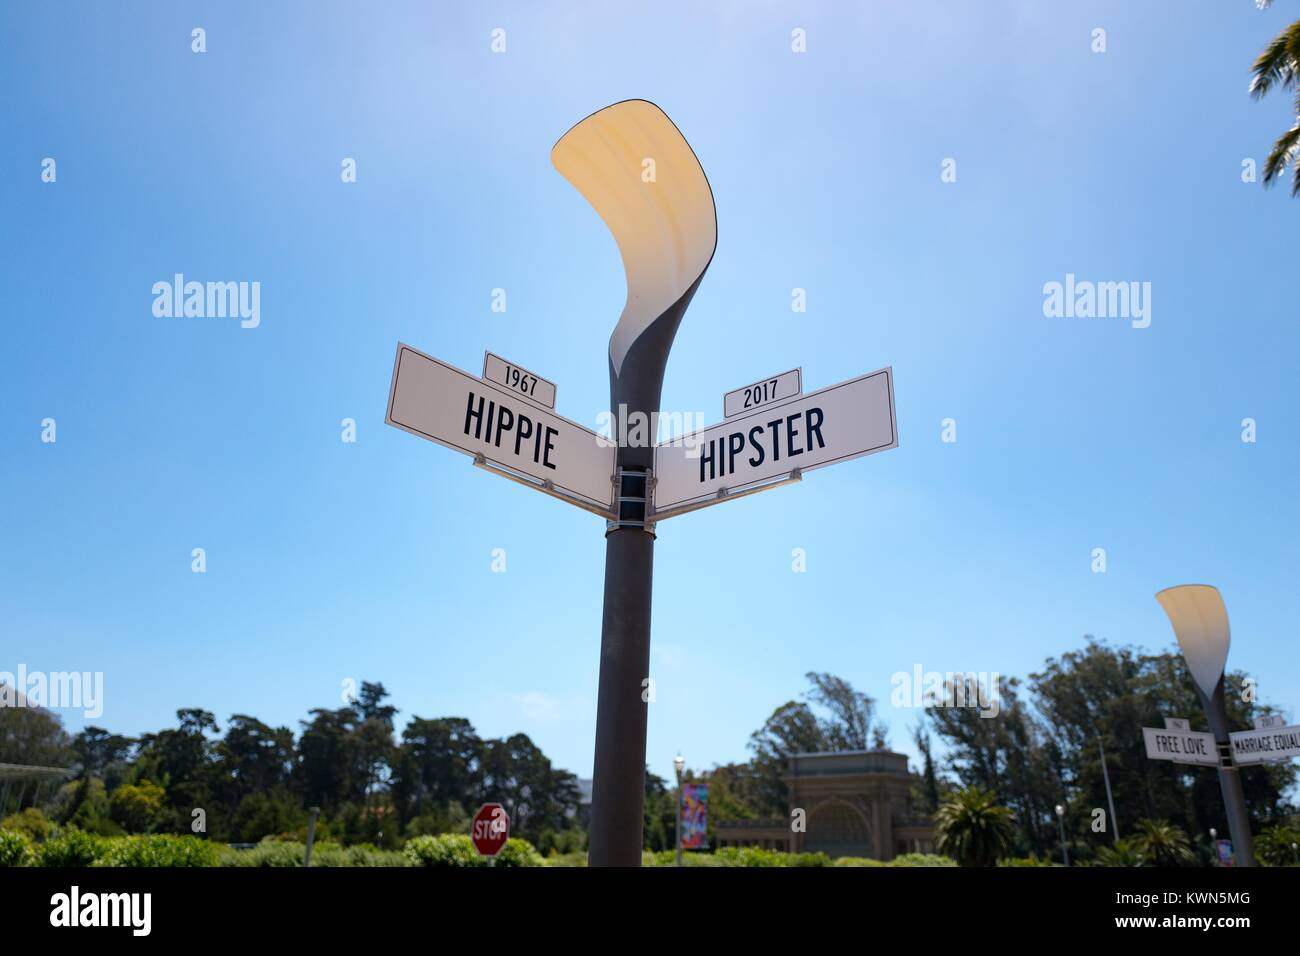 A mock street sign reads 1967 Hippie, 2017 Hipster, comparing a historical and modern social group within the city, at the De Young art museum in Golden Gate Park, San Francisco, California, July 11, 2017. Stock Photo